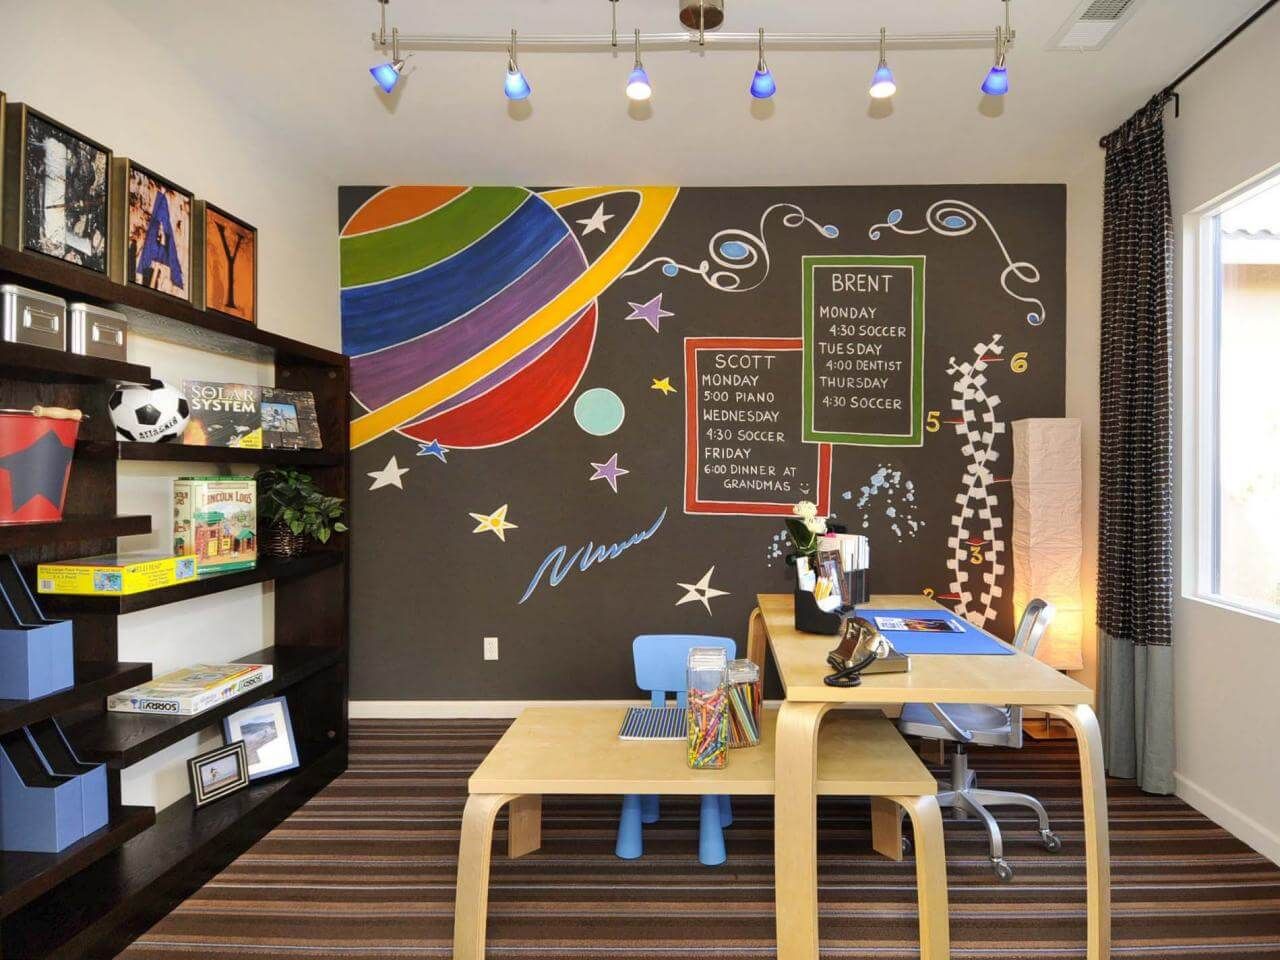 stydy space for kids 10 Tips to Design the Study Space Perfectly - 10